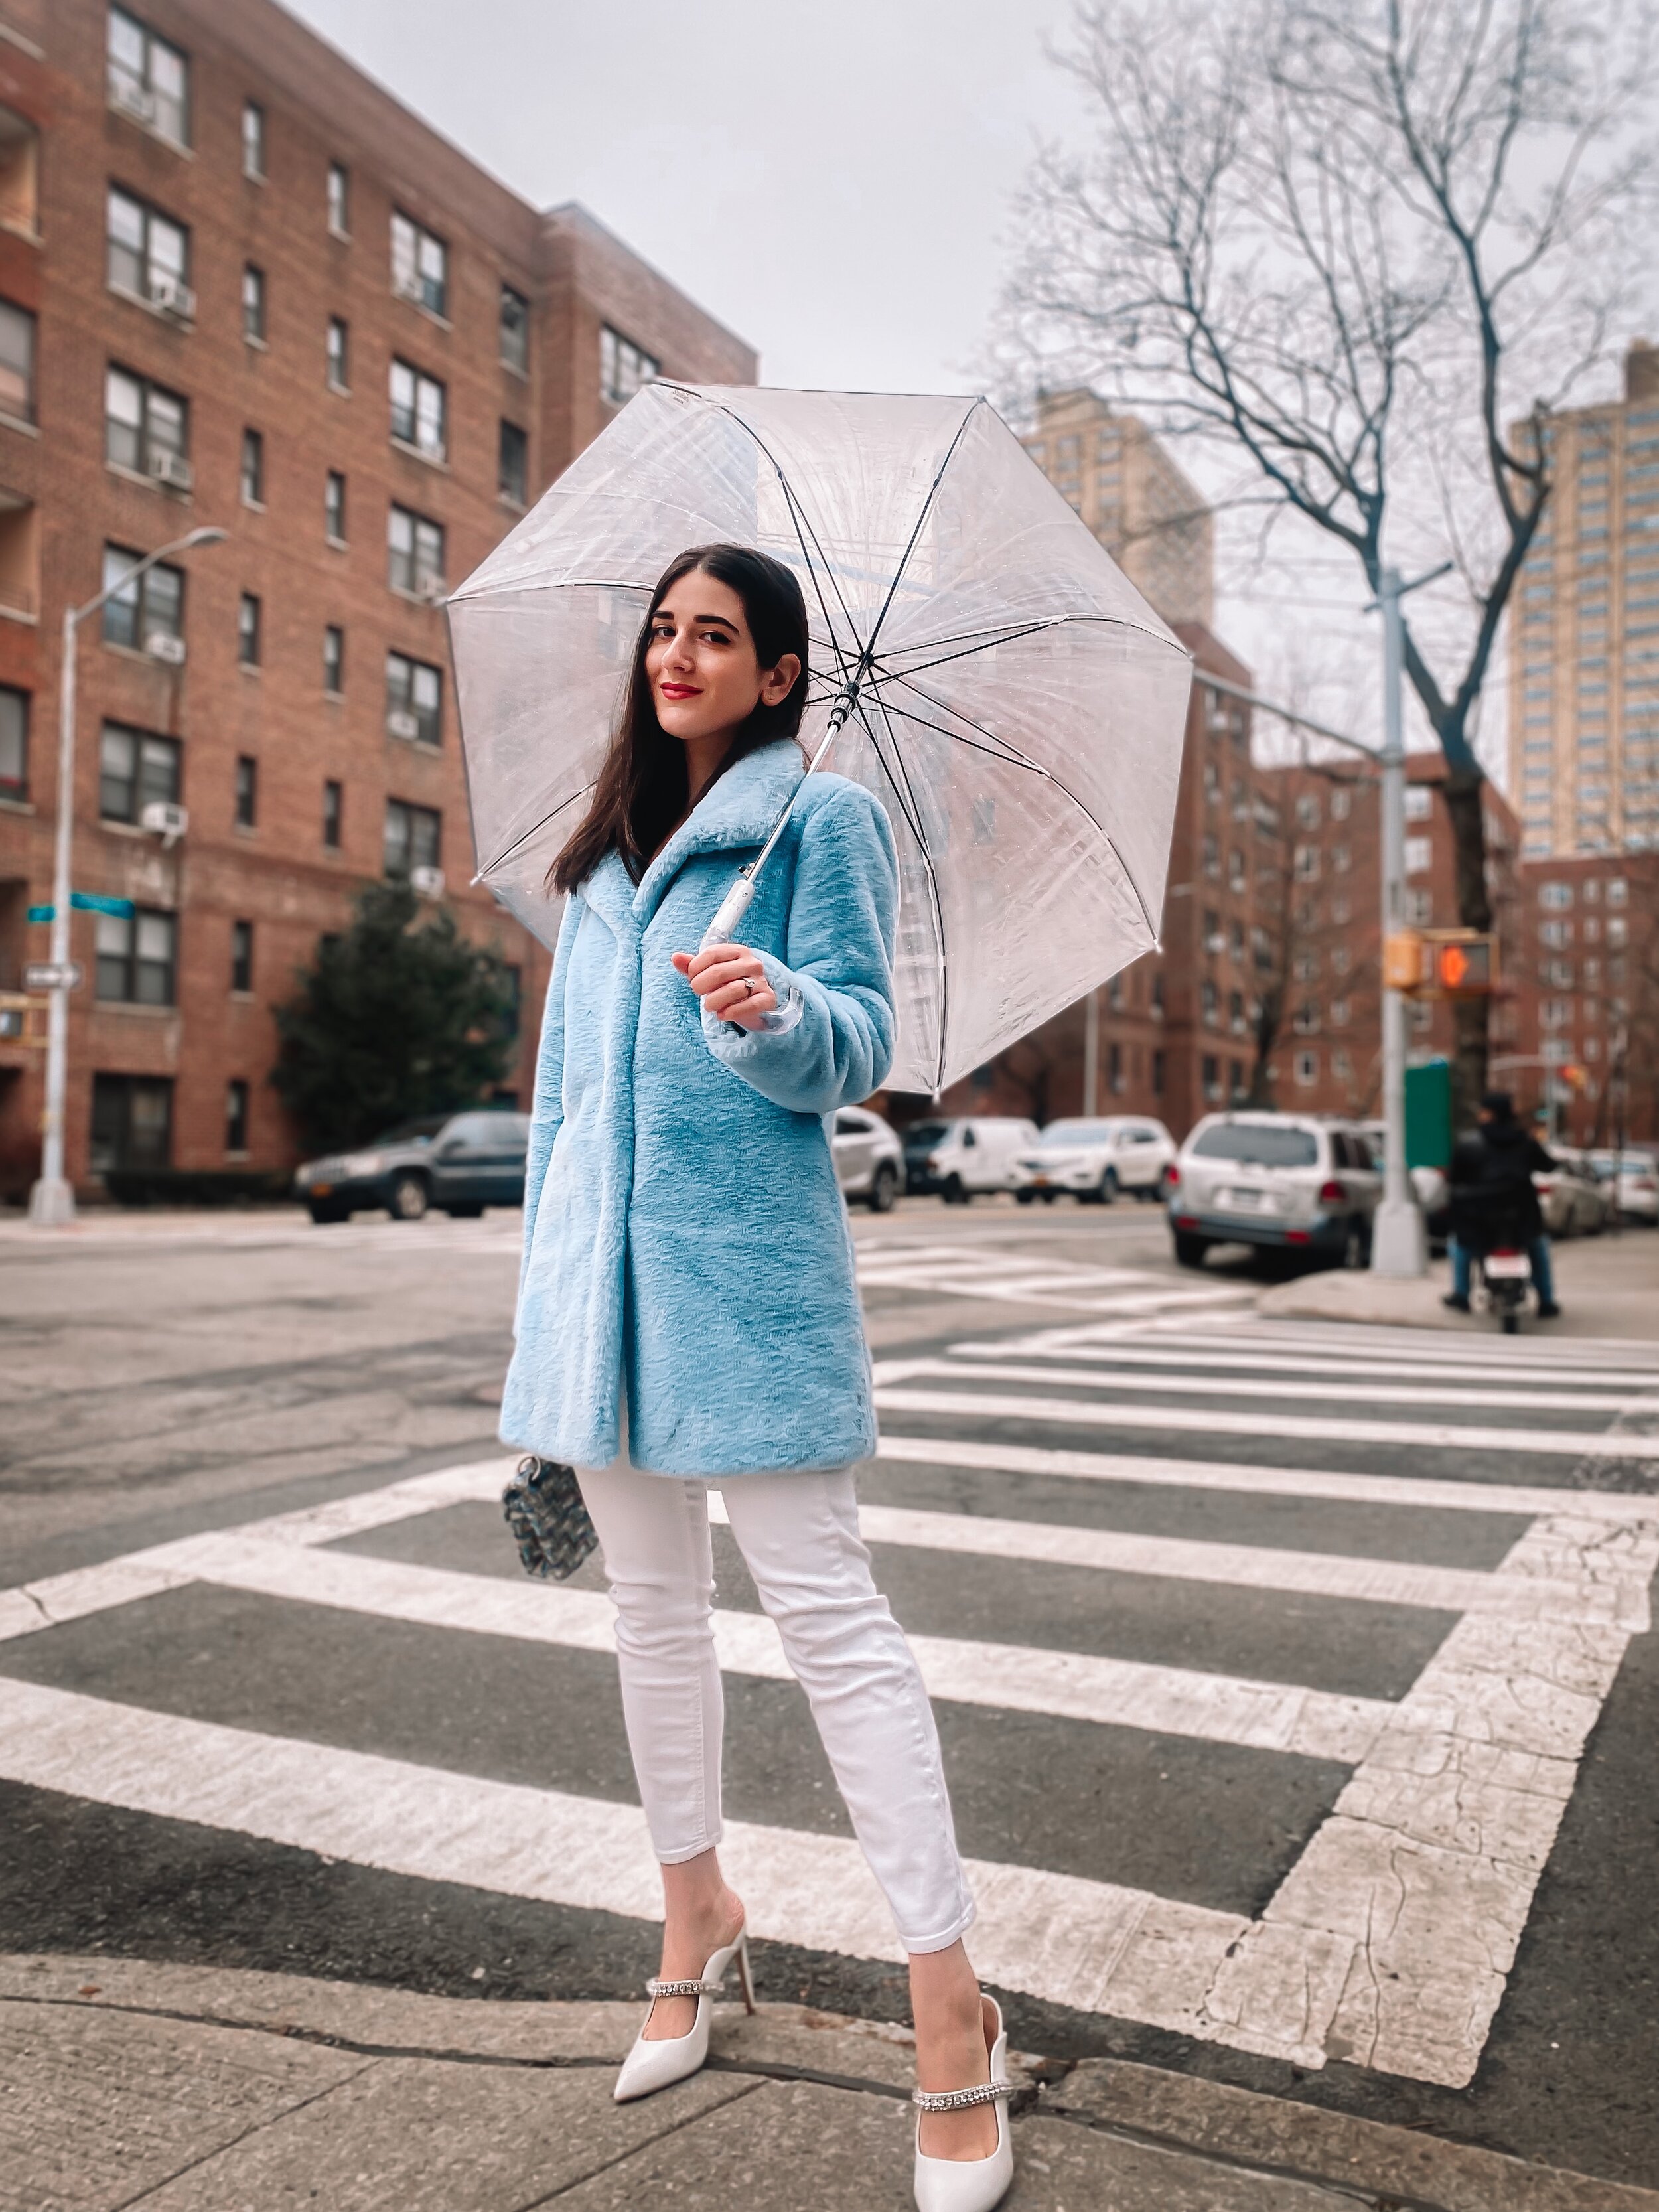 Esther Santer NYC Street Style Fashion Blogger New York City What To Wear Casual Shop Buy Girl Women Baby Blue Faux Fur Coat Calvin Klein Target Clear Dome Umbrella White Jeans 7 For All Mankind Kurt Geiger Duke White  Jewel Heels Tripod Photo Rainy.JPG